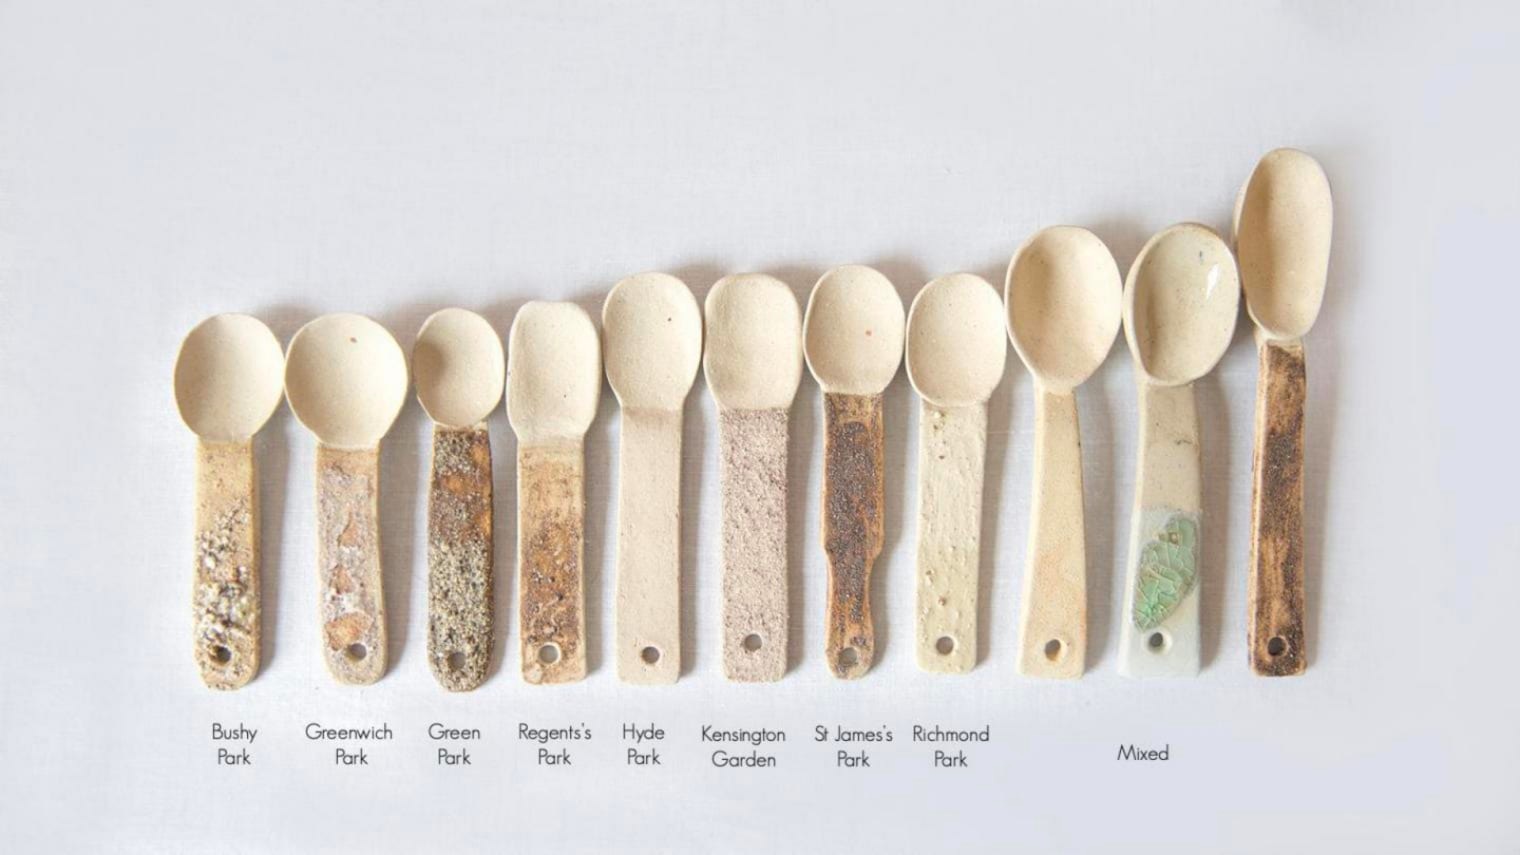 Photograph taken from above, of a row of rustic-looking wooden spoons, getting bigger from left to right, and with text labels under each, on a cream background.